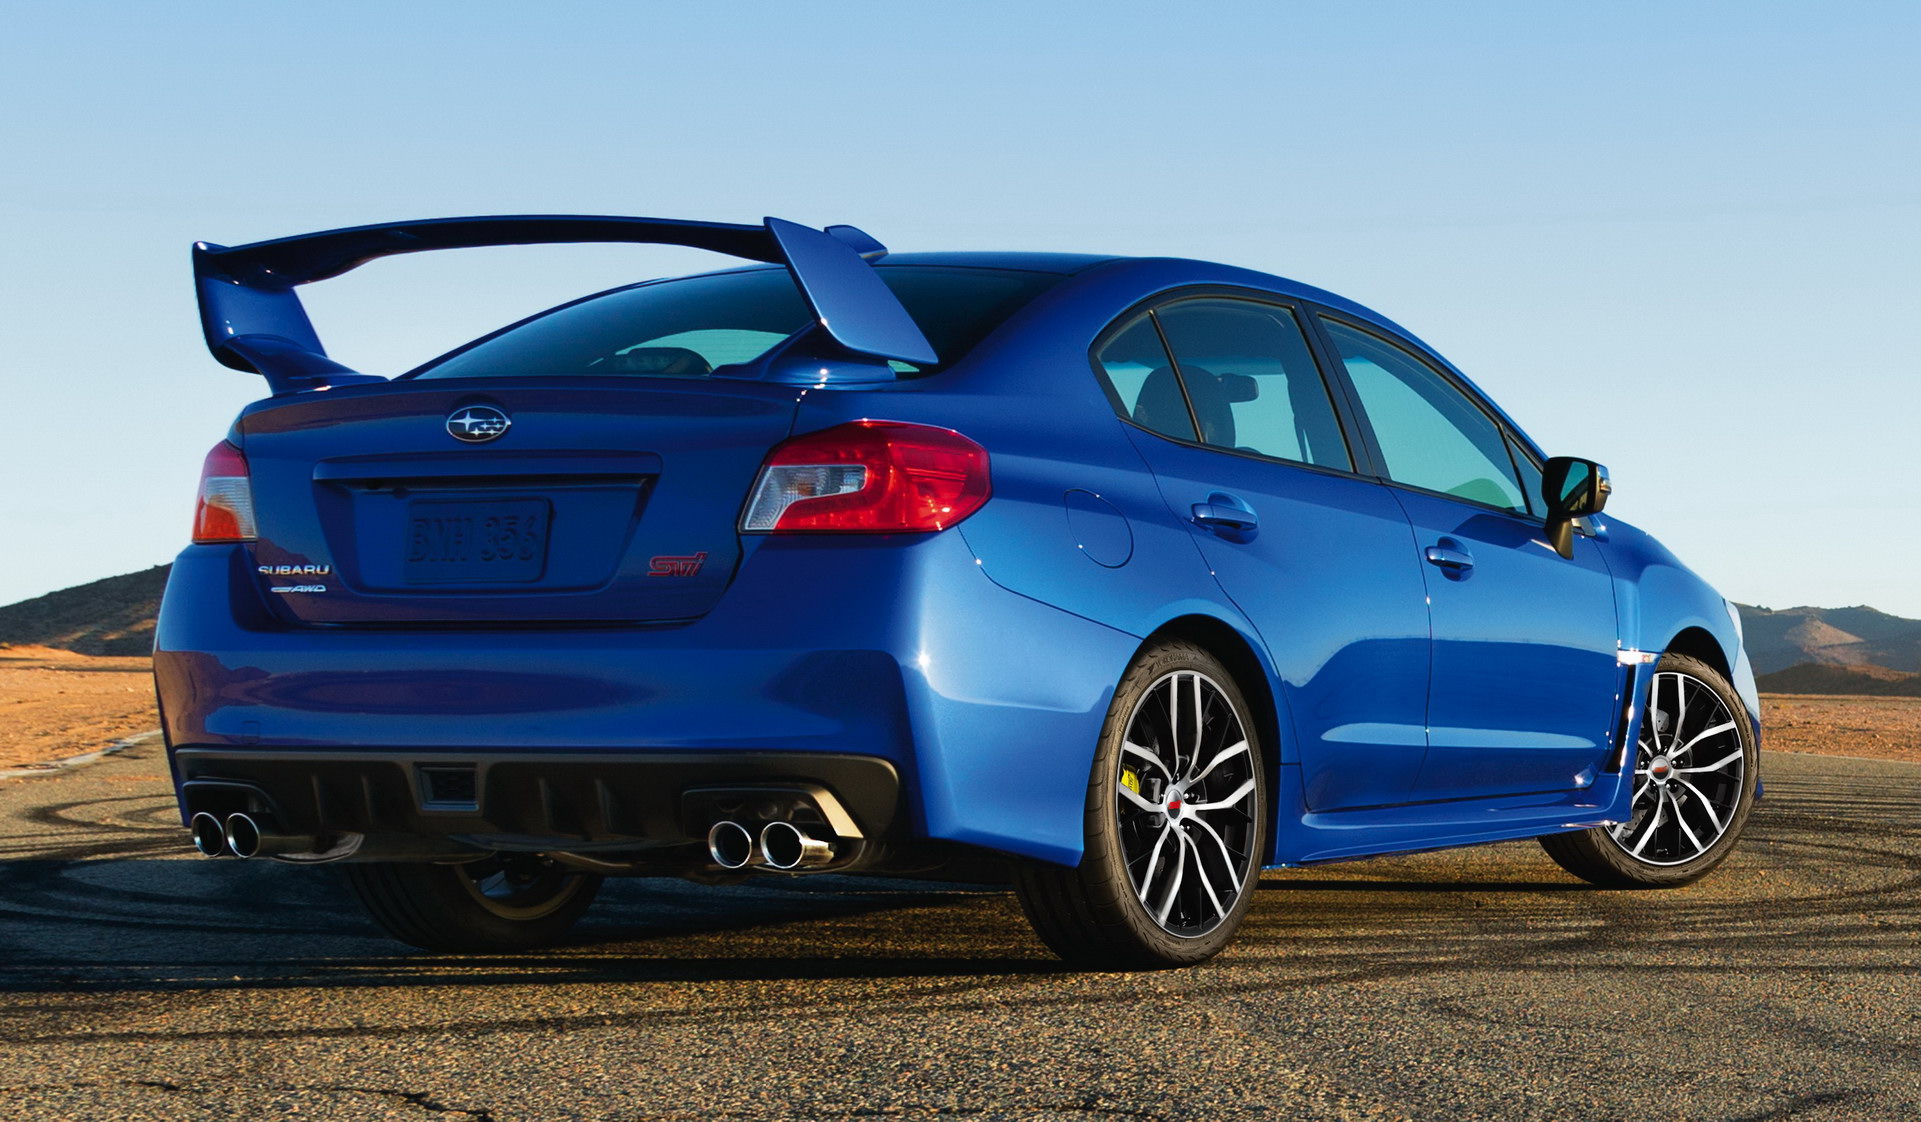 2022 Subaru WRX: What We Know About The Rally-Inspired Compact, From